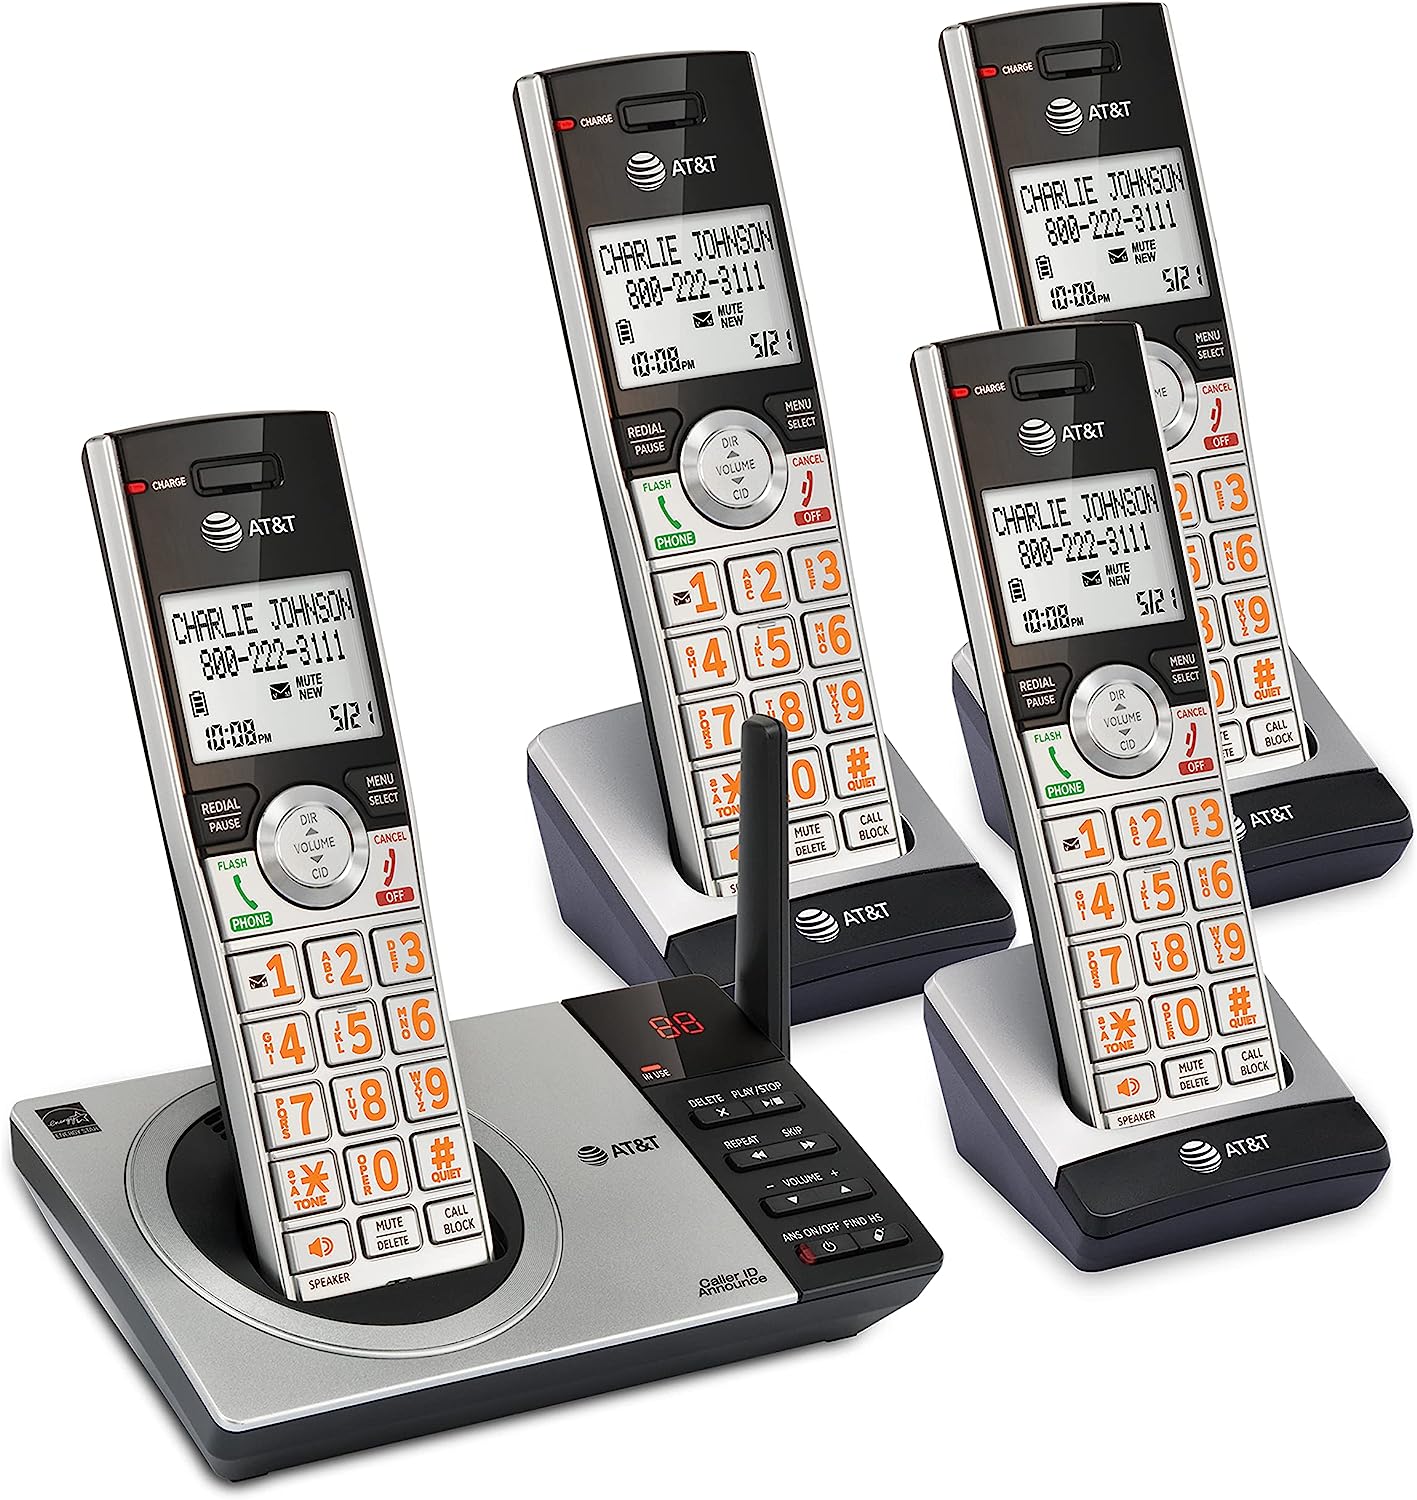 AT&T CL82407 DECT 6.0 4-Handset Cordless Phone for [...]